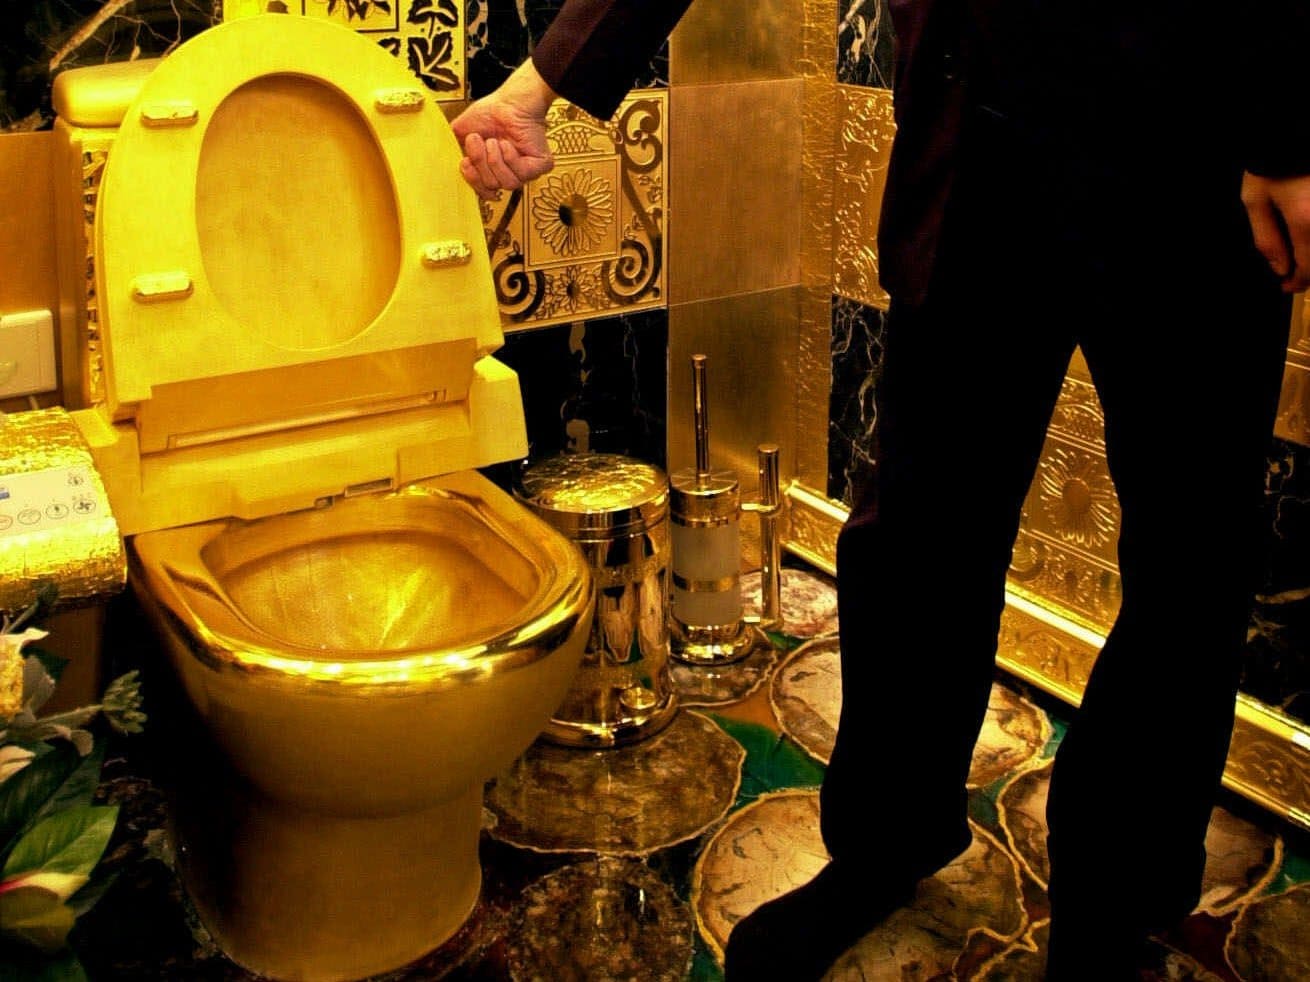 A staff member of the 3D-Gold jewelry store in Hong Kong shows off a solid gold toilet to reporters Thursday, Feb. 22, 2001. The shop owner says he was inspired by the writings of the Russian communist Vladimir I. Lenin, who wanted to build public toilets of gold after the triumph of socialism. (AP Photo/Vincent Yu )